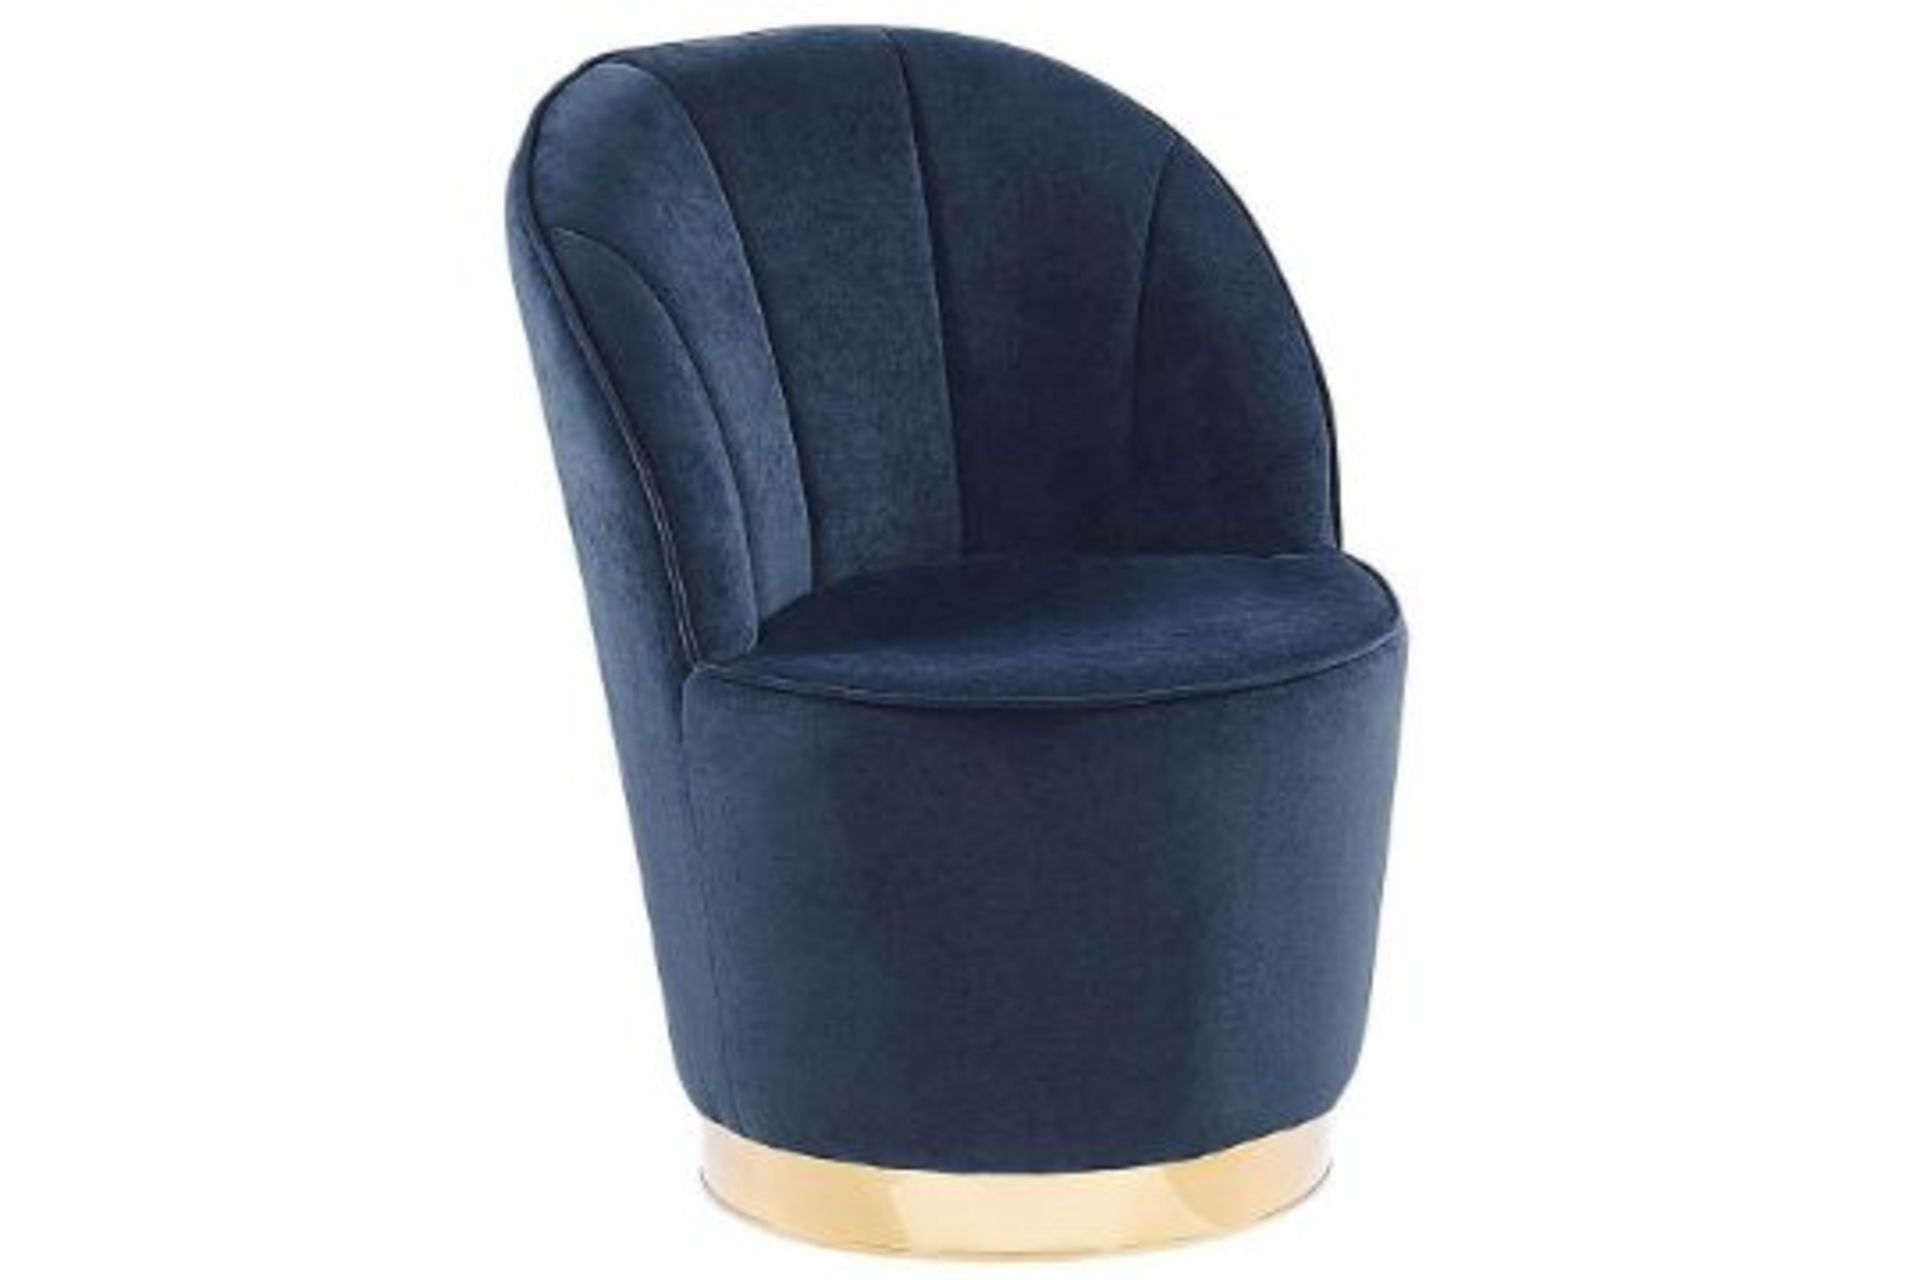 Alby Velvet Armchair Dark Blue13/12. - ER24. RRP £329.99. This beautifully shaped tub chair is a